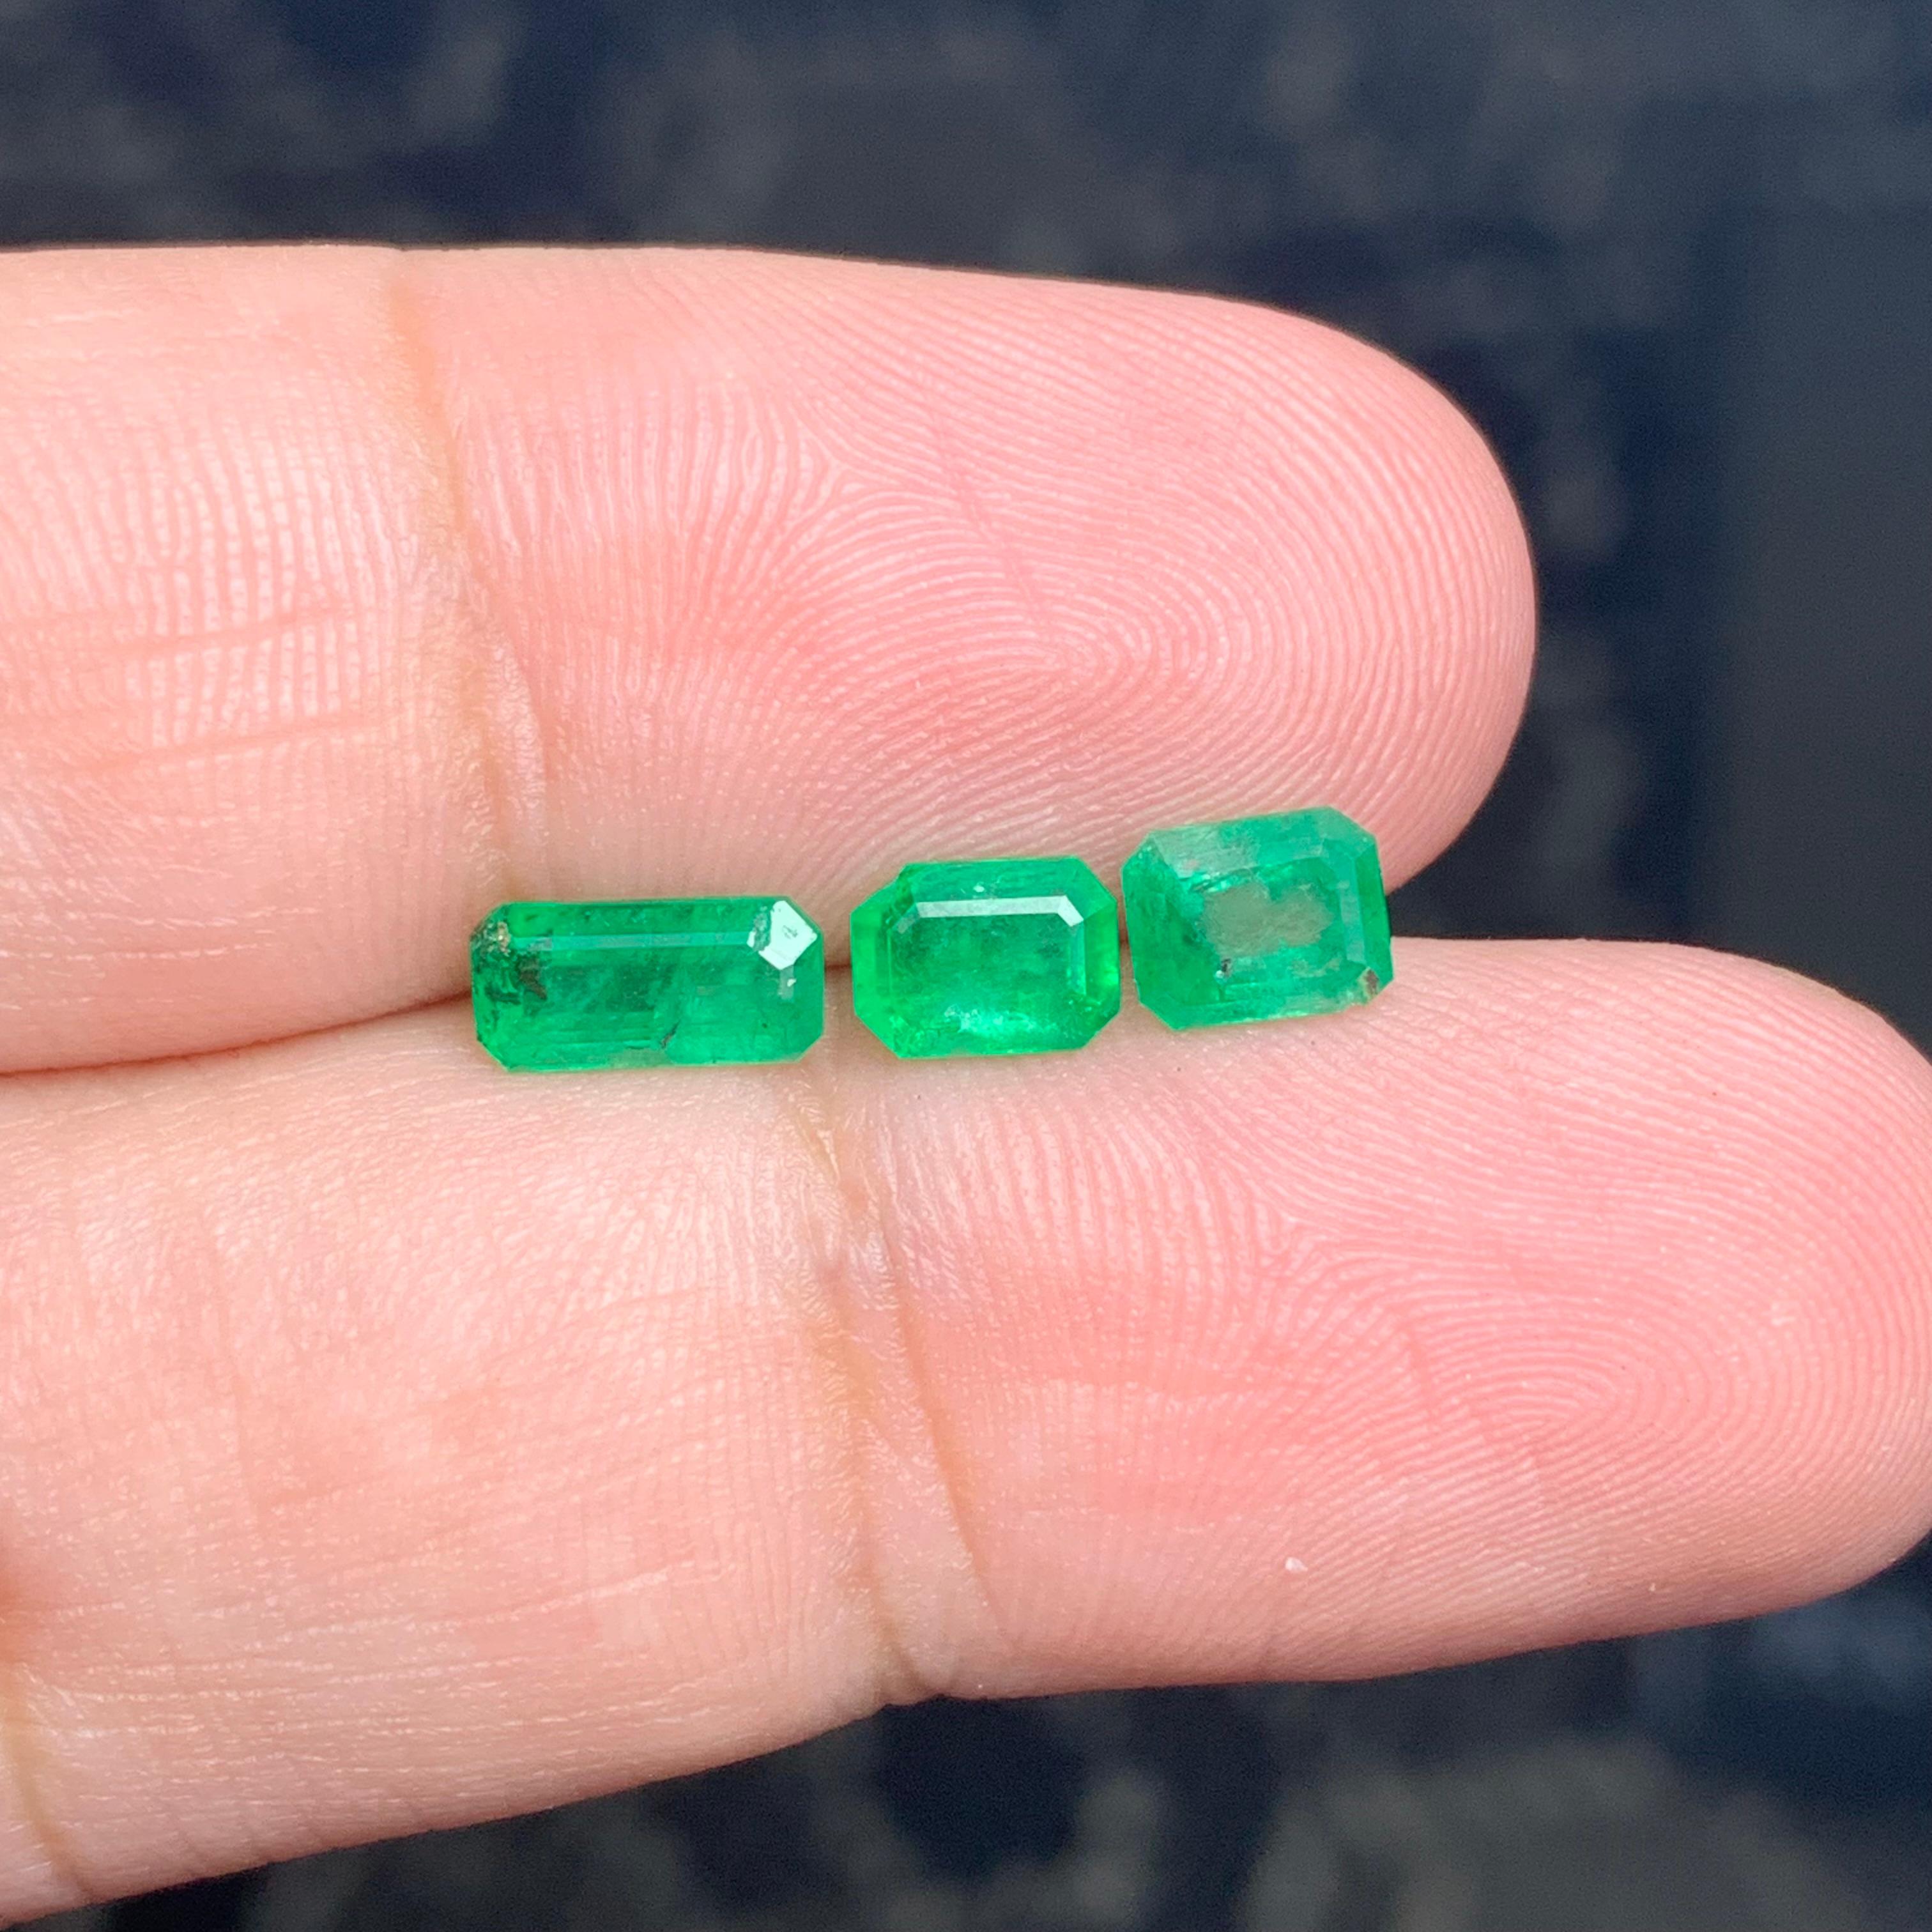 Loose Emerald
Weight: 2.05 Carats
Sizes: 0.60 to 0.75 Carat 
Origin: Swat Pakistan
Color: Green
Treatment: Non
Certificate: On Demand

The Swat Emerald, also known as the Mingora Emerald, is a rare and highly prized gemstone originating from the